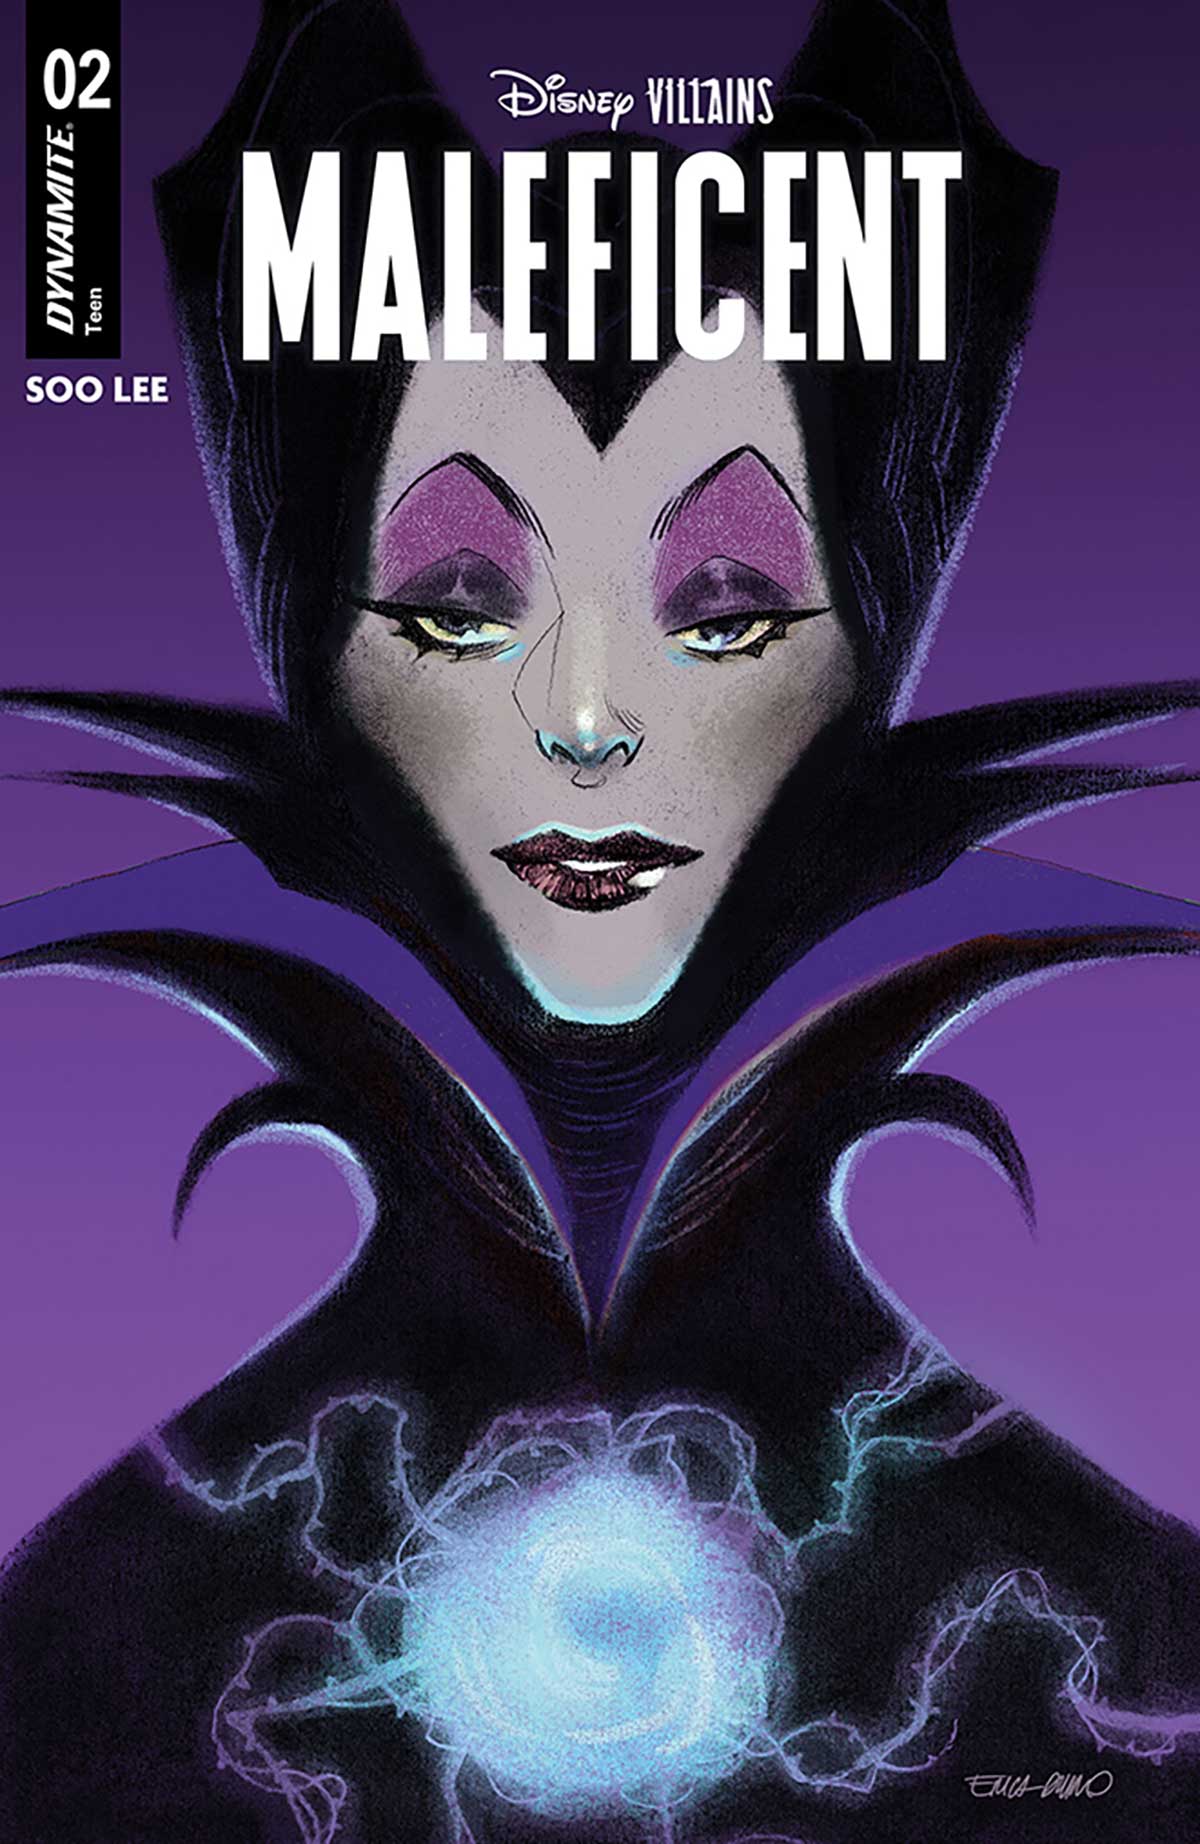 PREVIEW: Disney Villains: Maleficent #2 — Major Spoilers — Comic Book Reviews, News, Previews, and Podcasts